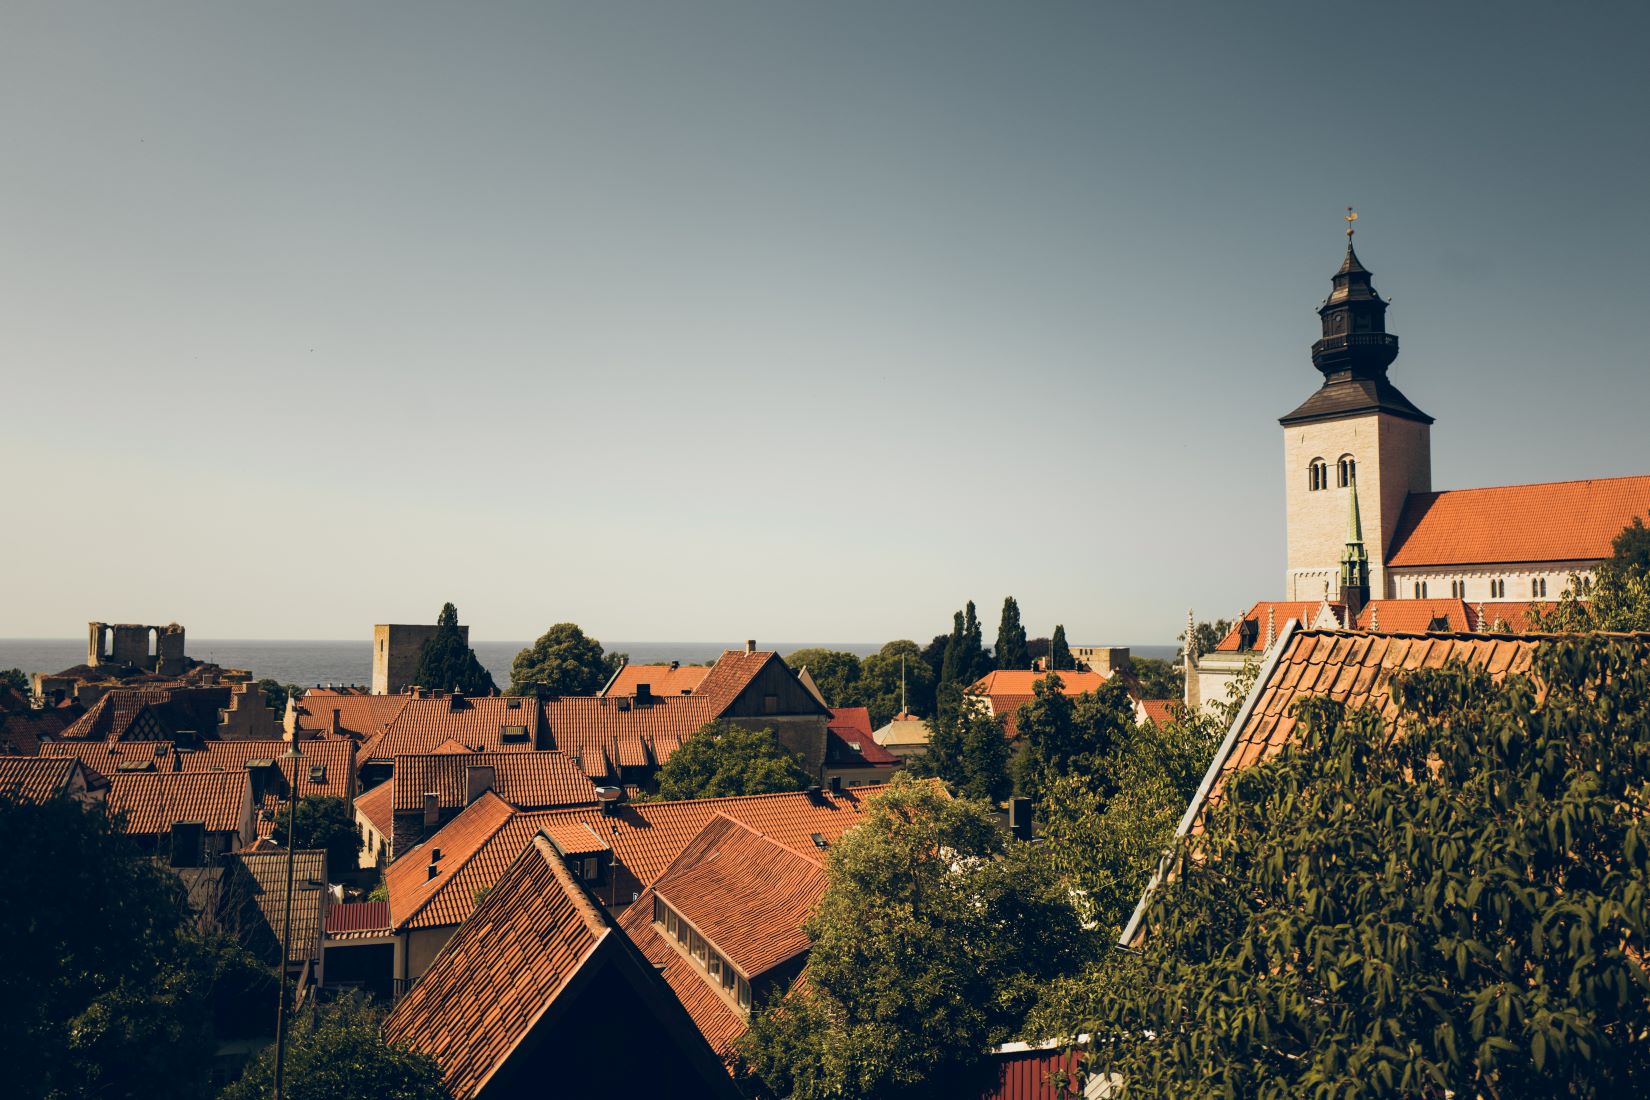 SSC at the Almedalen political week in Visby